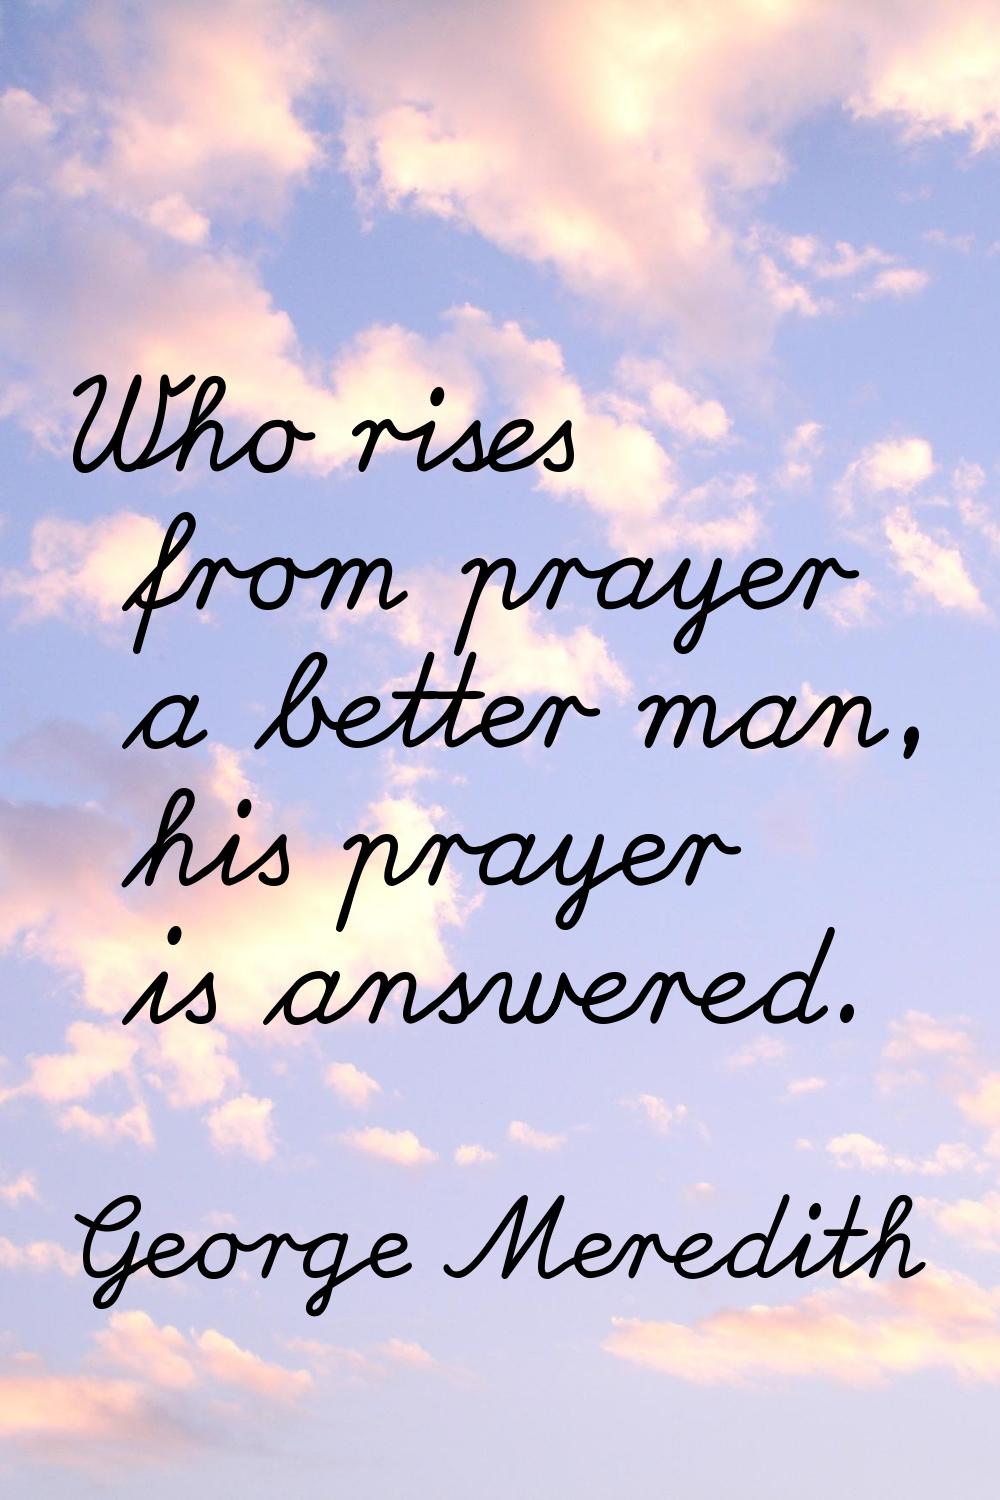 Who rises from prayer a better man, his prayer is answered.